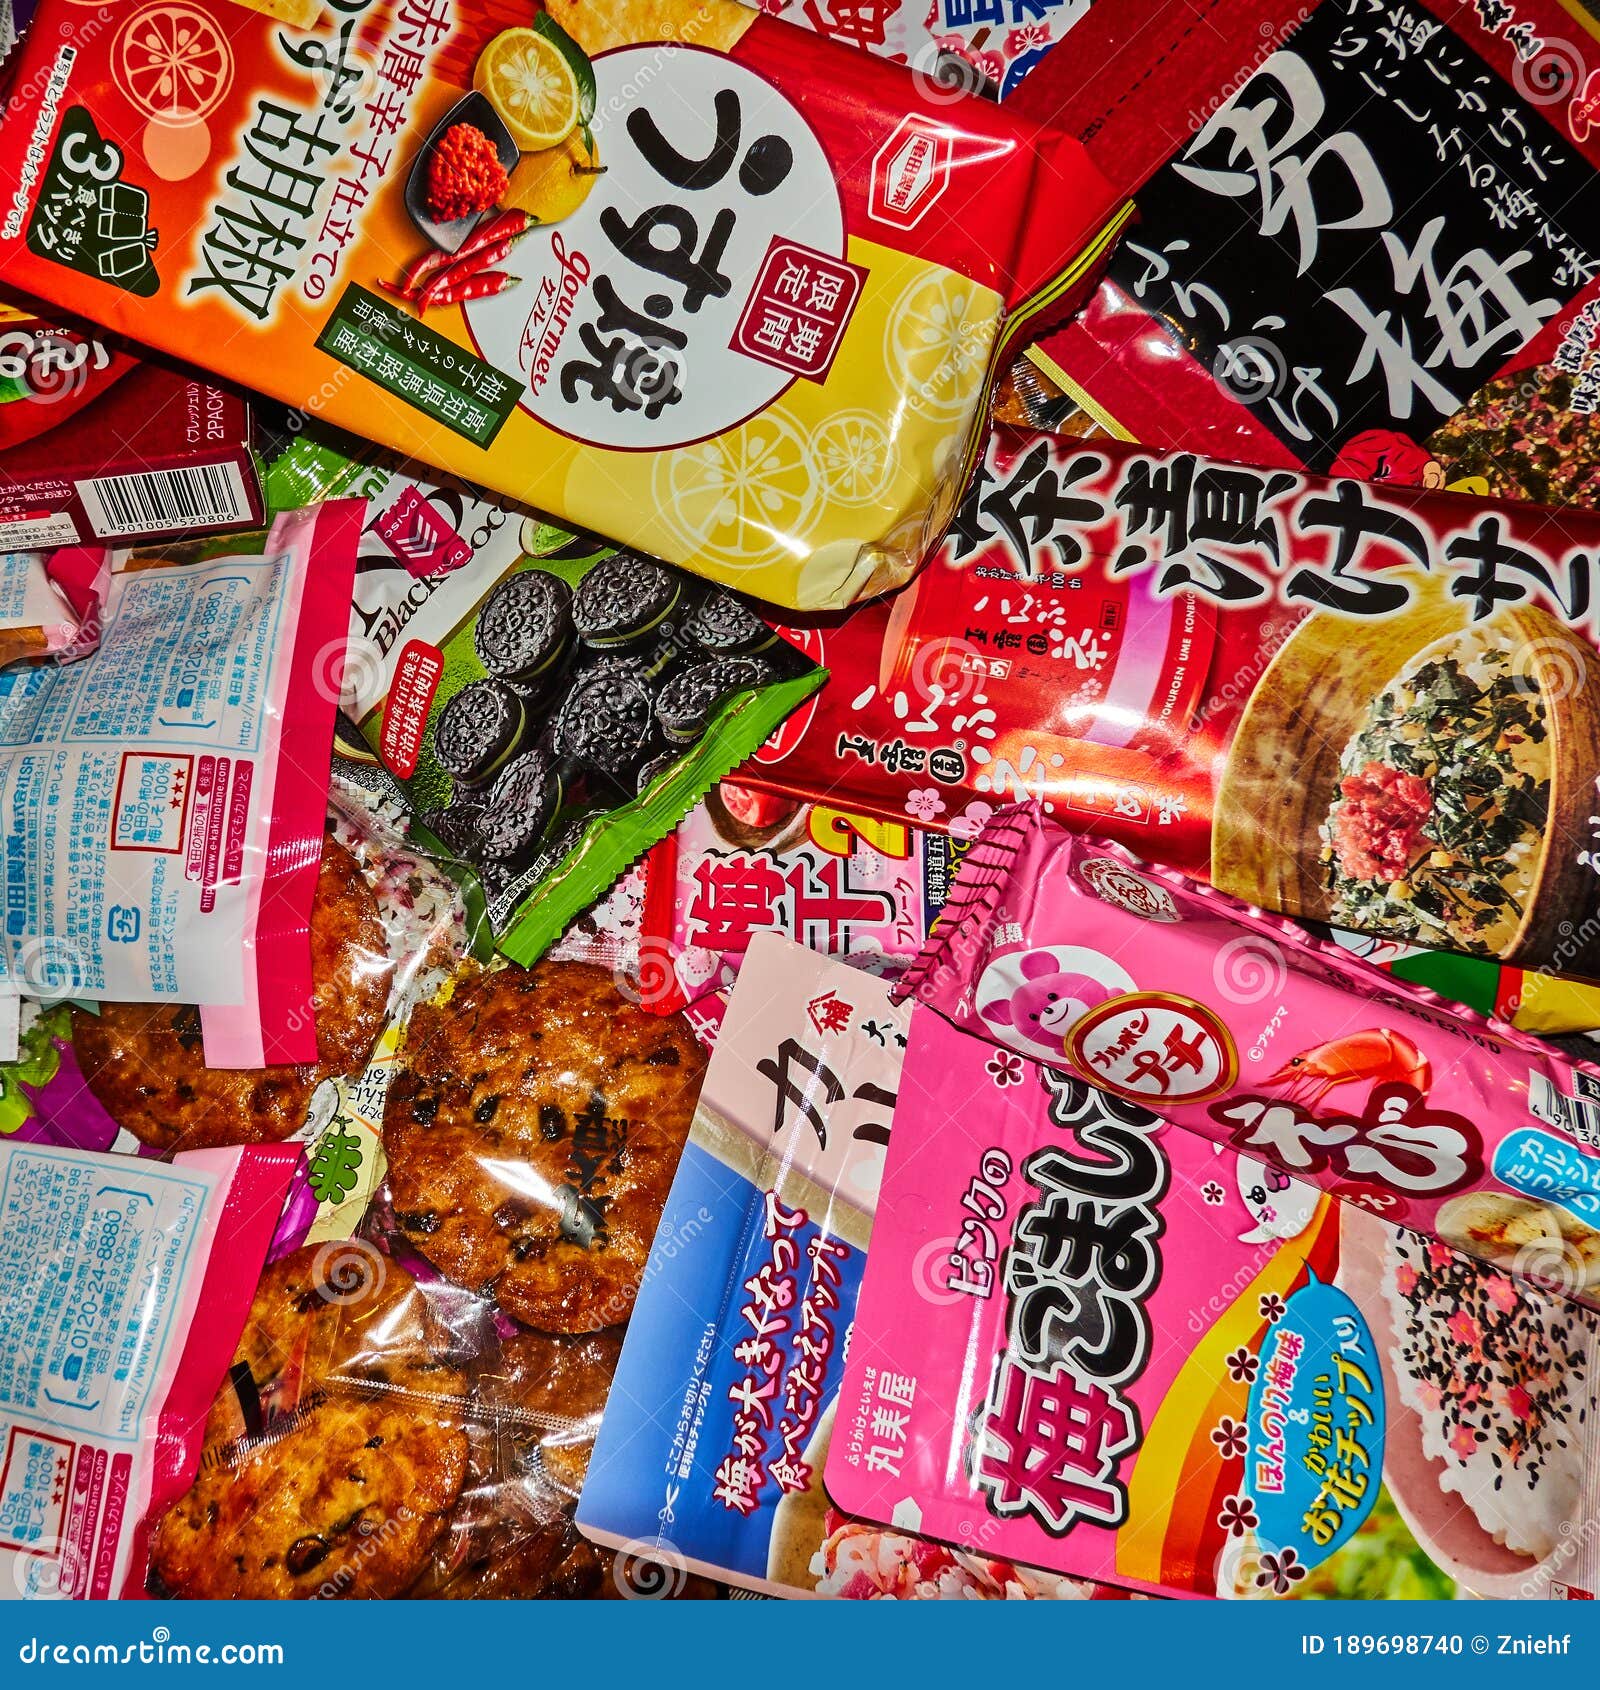 Japanese Sweets, Nibbles and Treats, Quick Chemical Food for in between ...